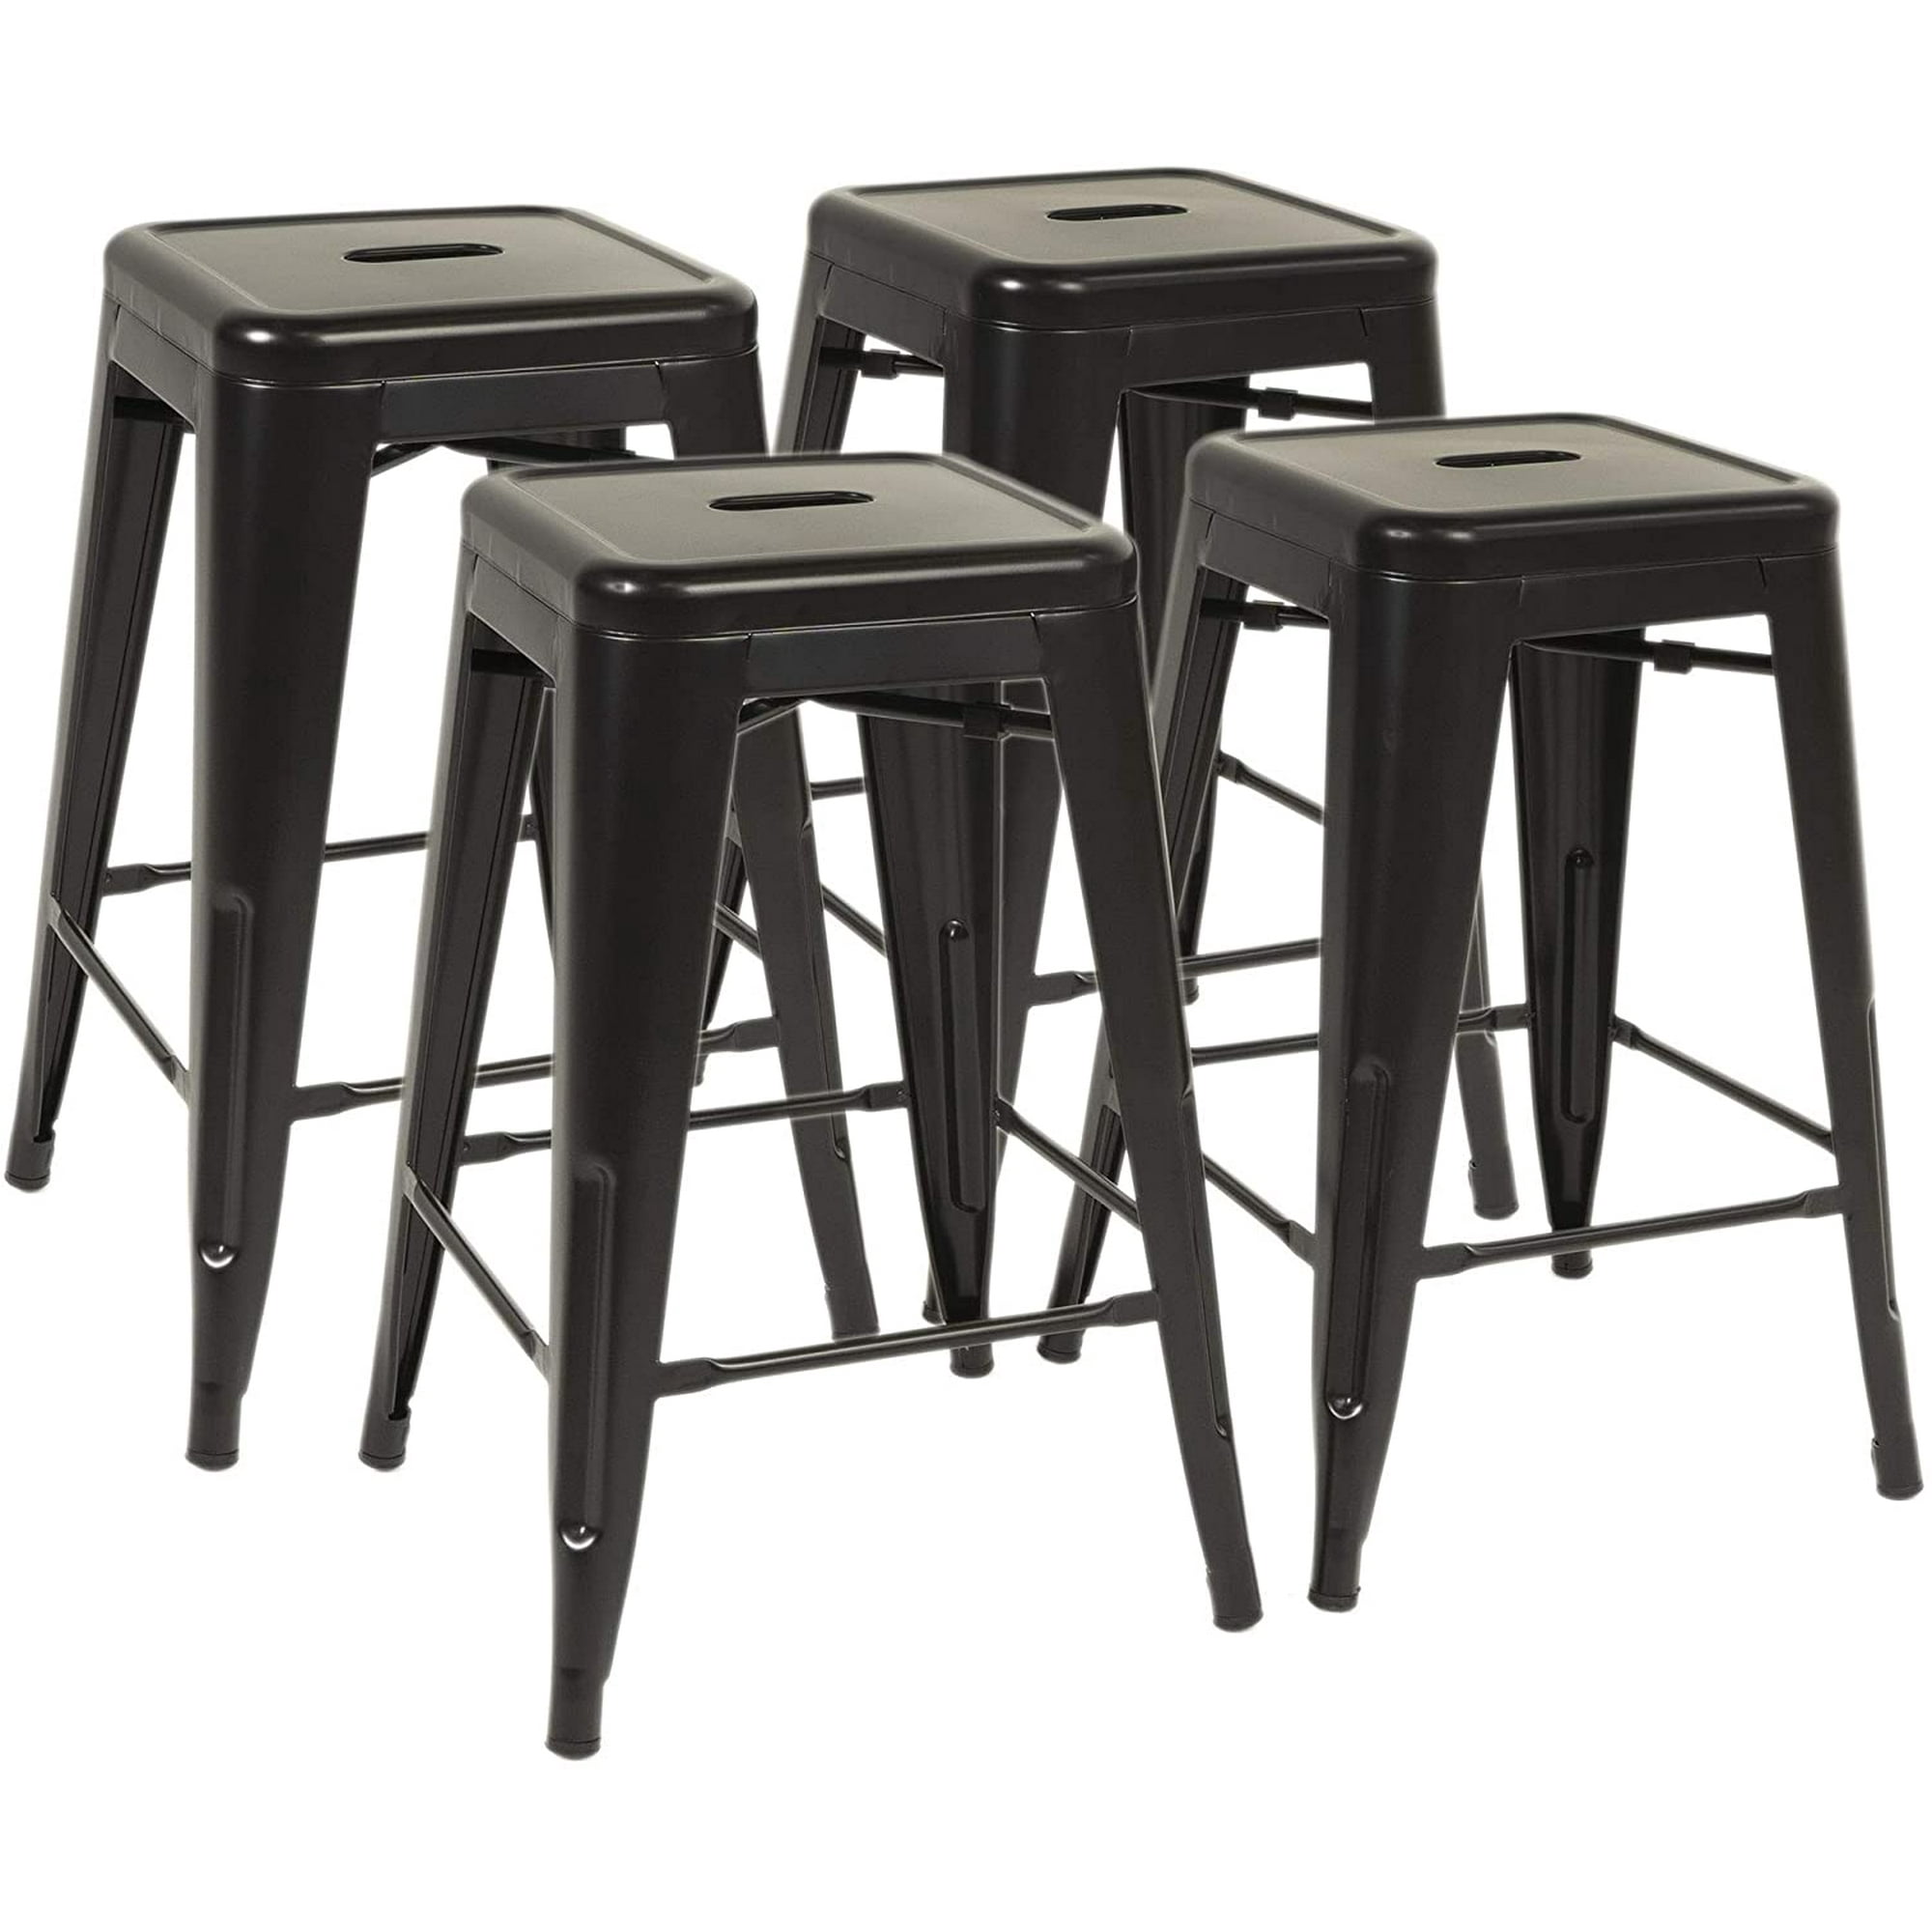 Fdw Metal Bar Stools Set Of 4 Counter, What Height Should A Kitchen Counter Stool Be Placed